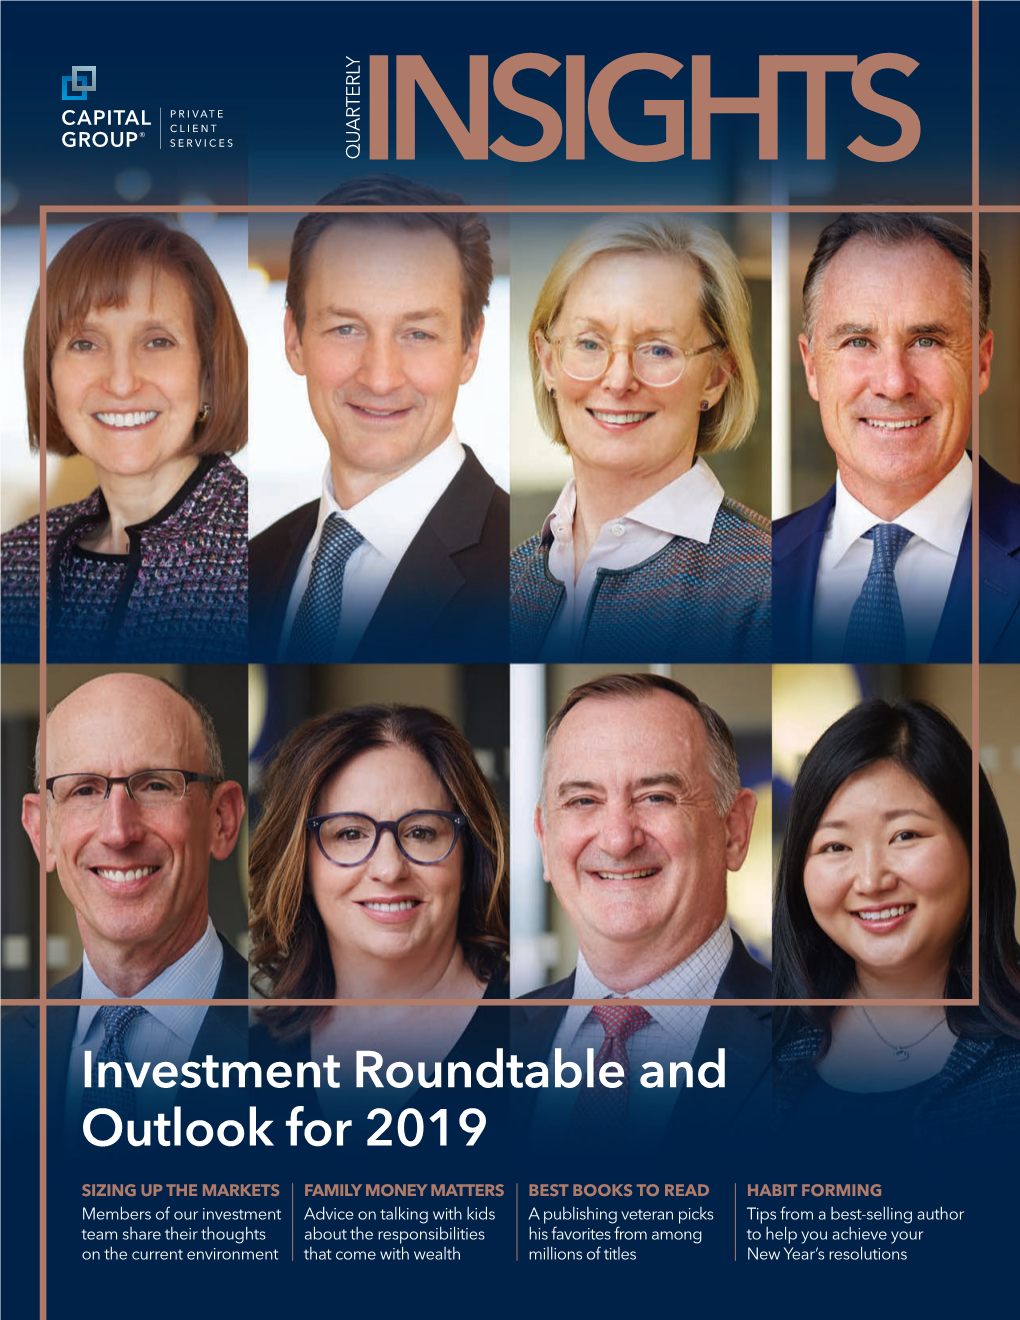 Investment Roundtable and Outlook for 2019